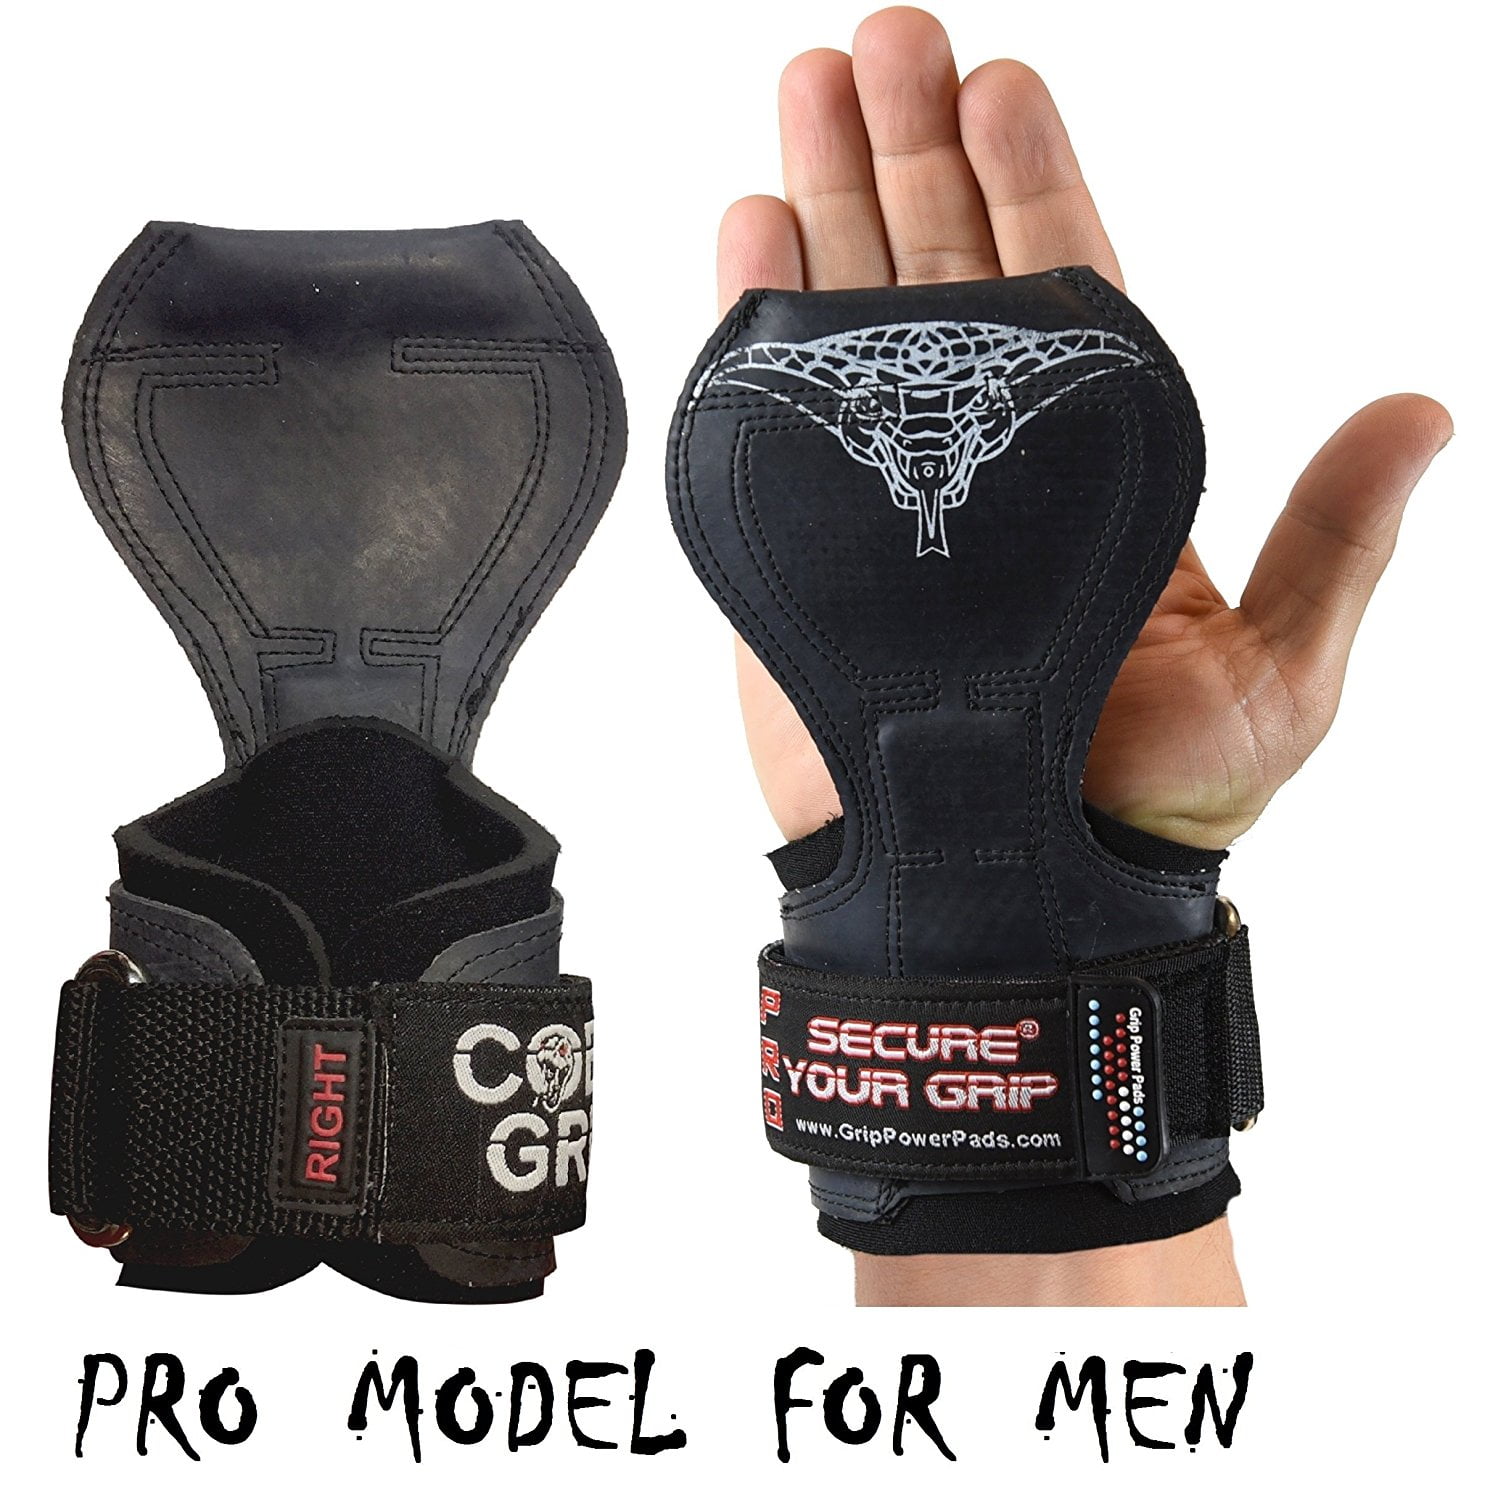 Crossfit & Powerlfting BONUS ITEMS! Details about   Exercise Gloves Perfect for Weightlifting 